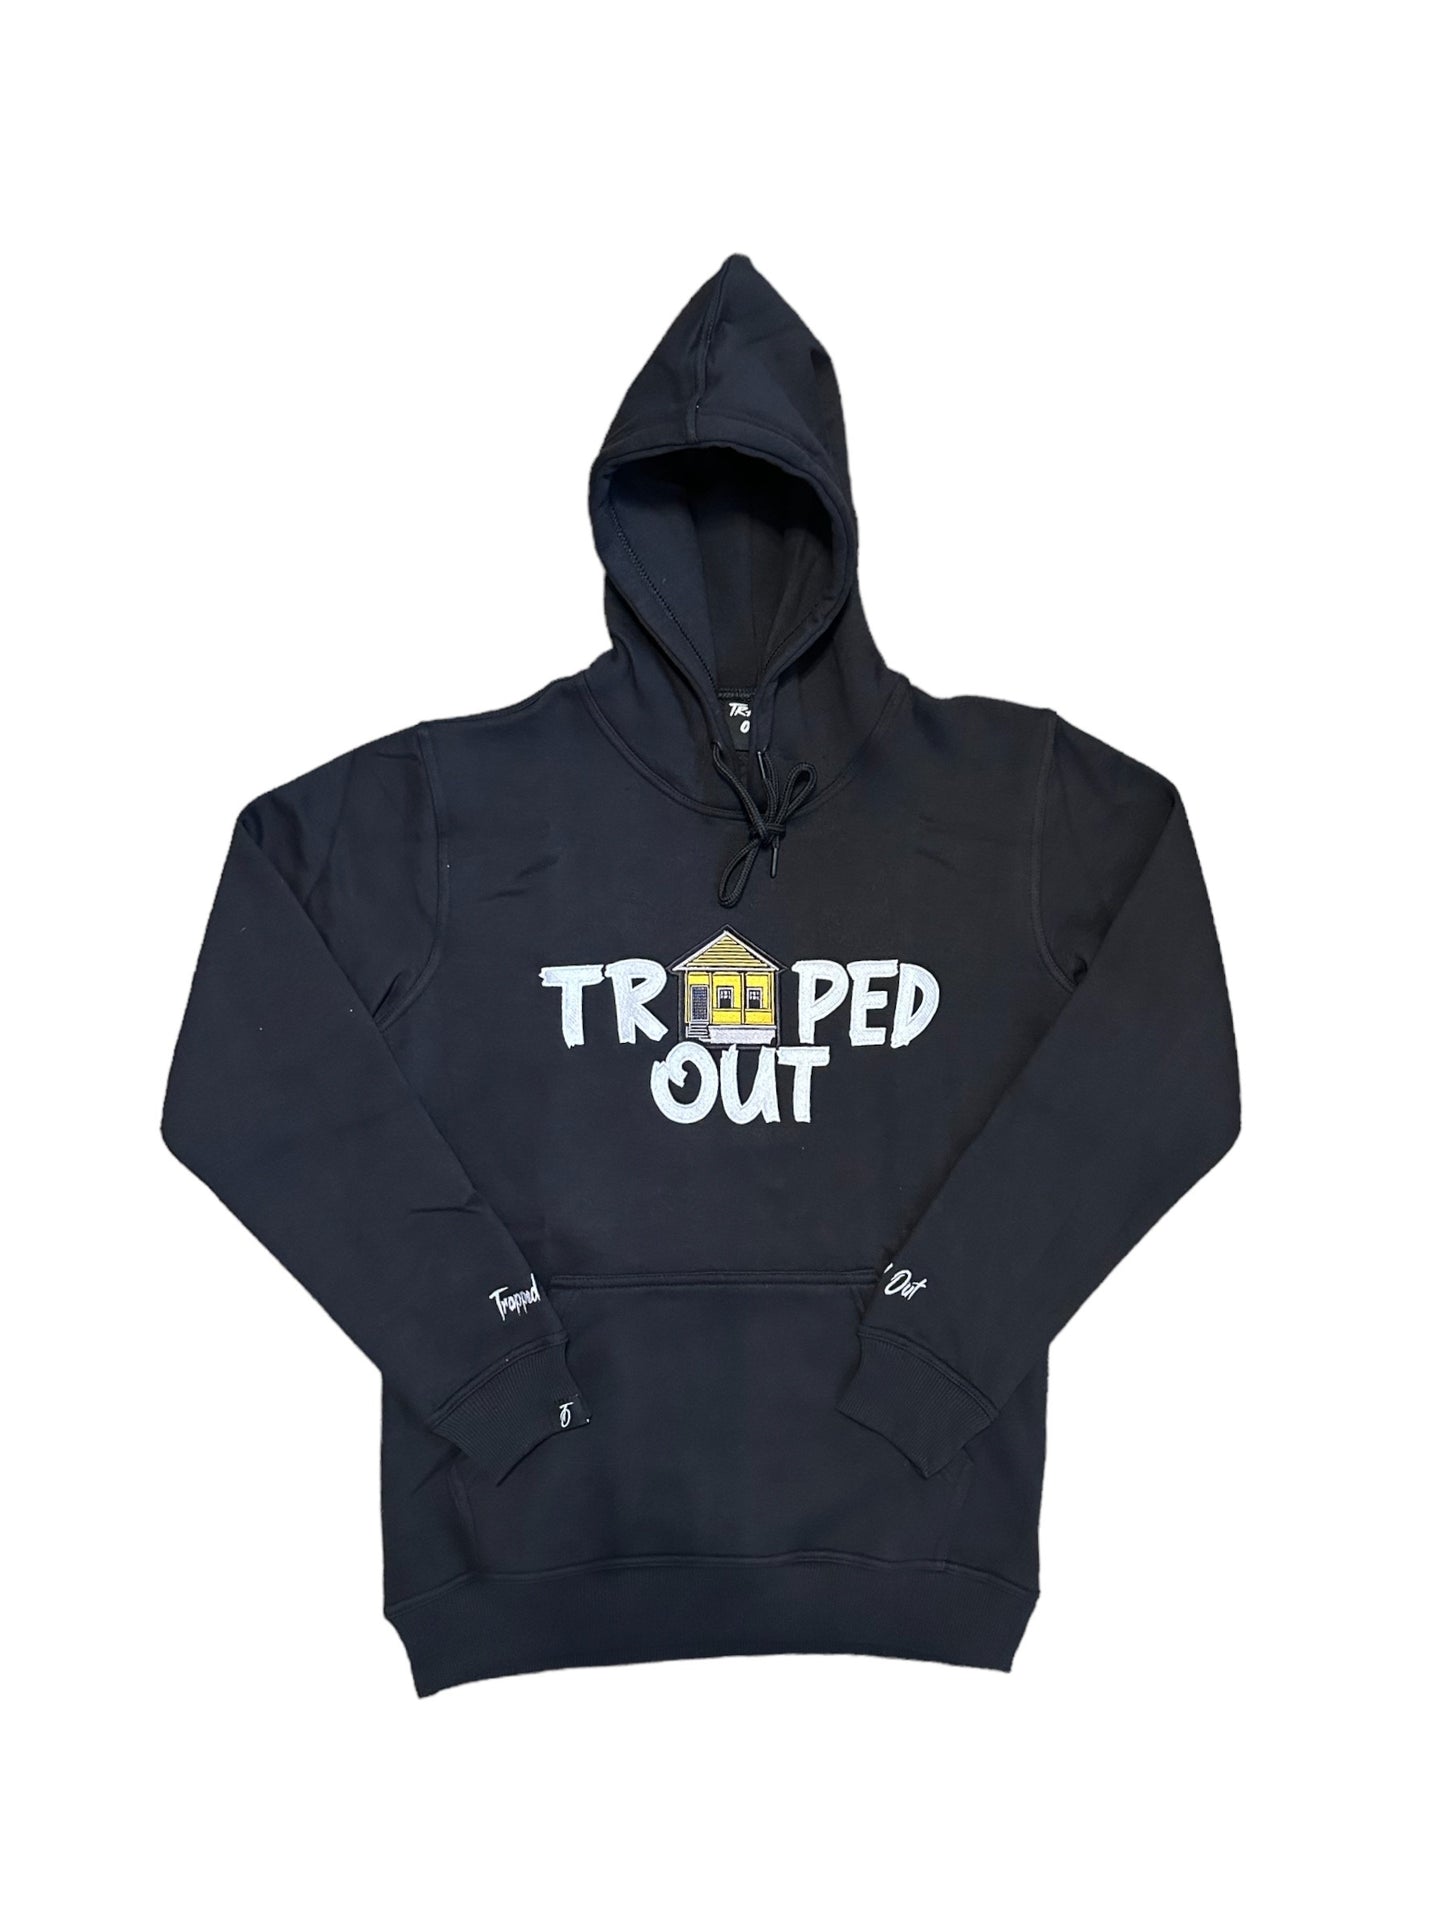 Black & White Traped Out Hoodie